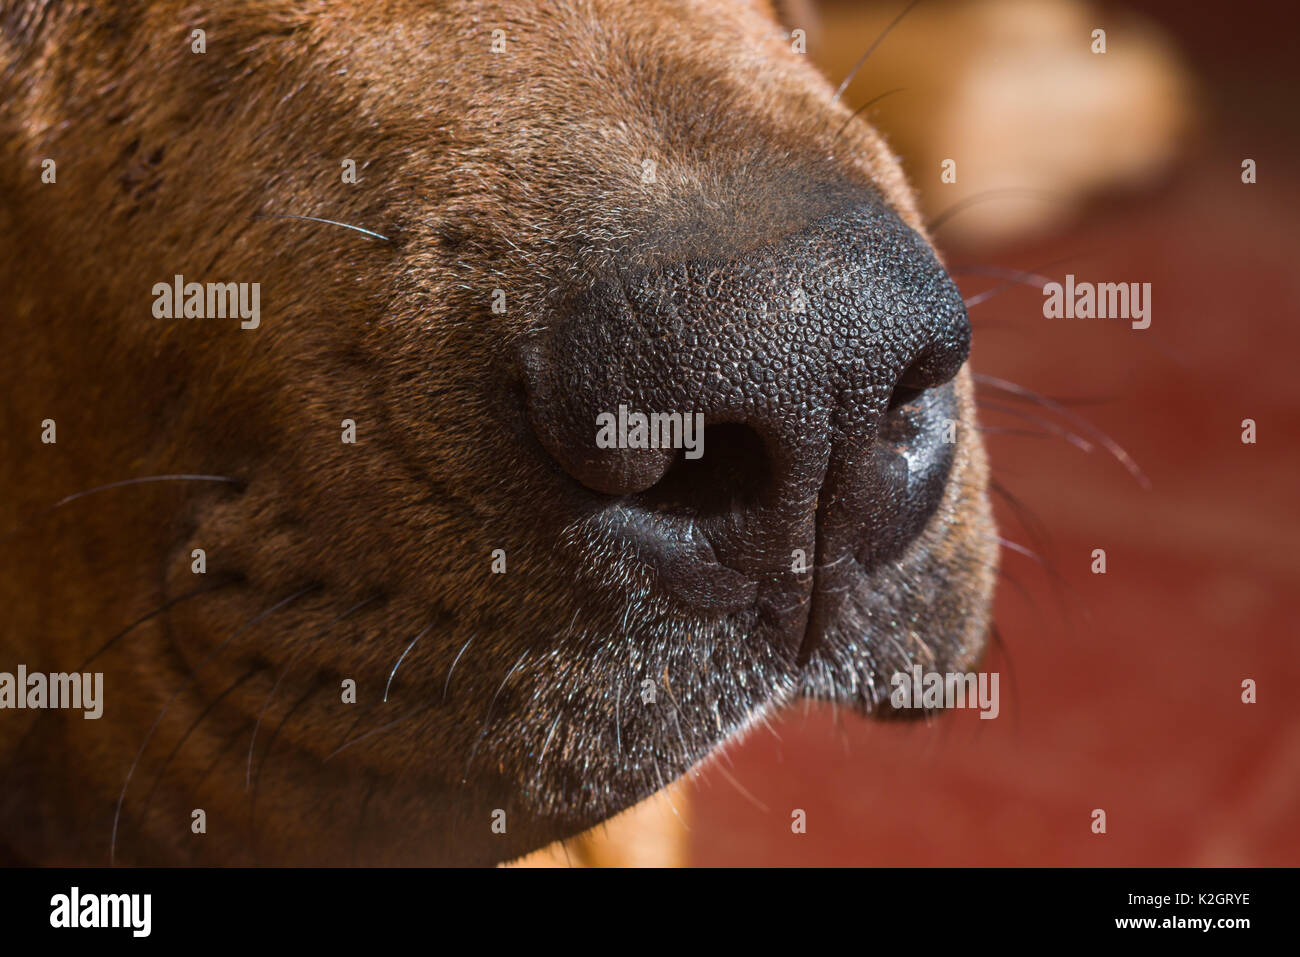 Close up of a dogs nose Stock Photo